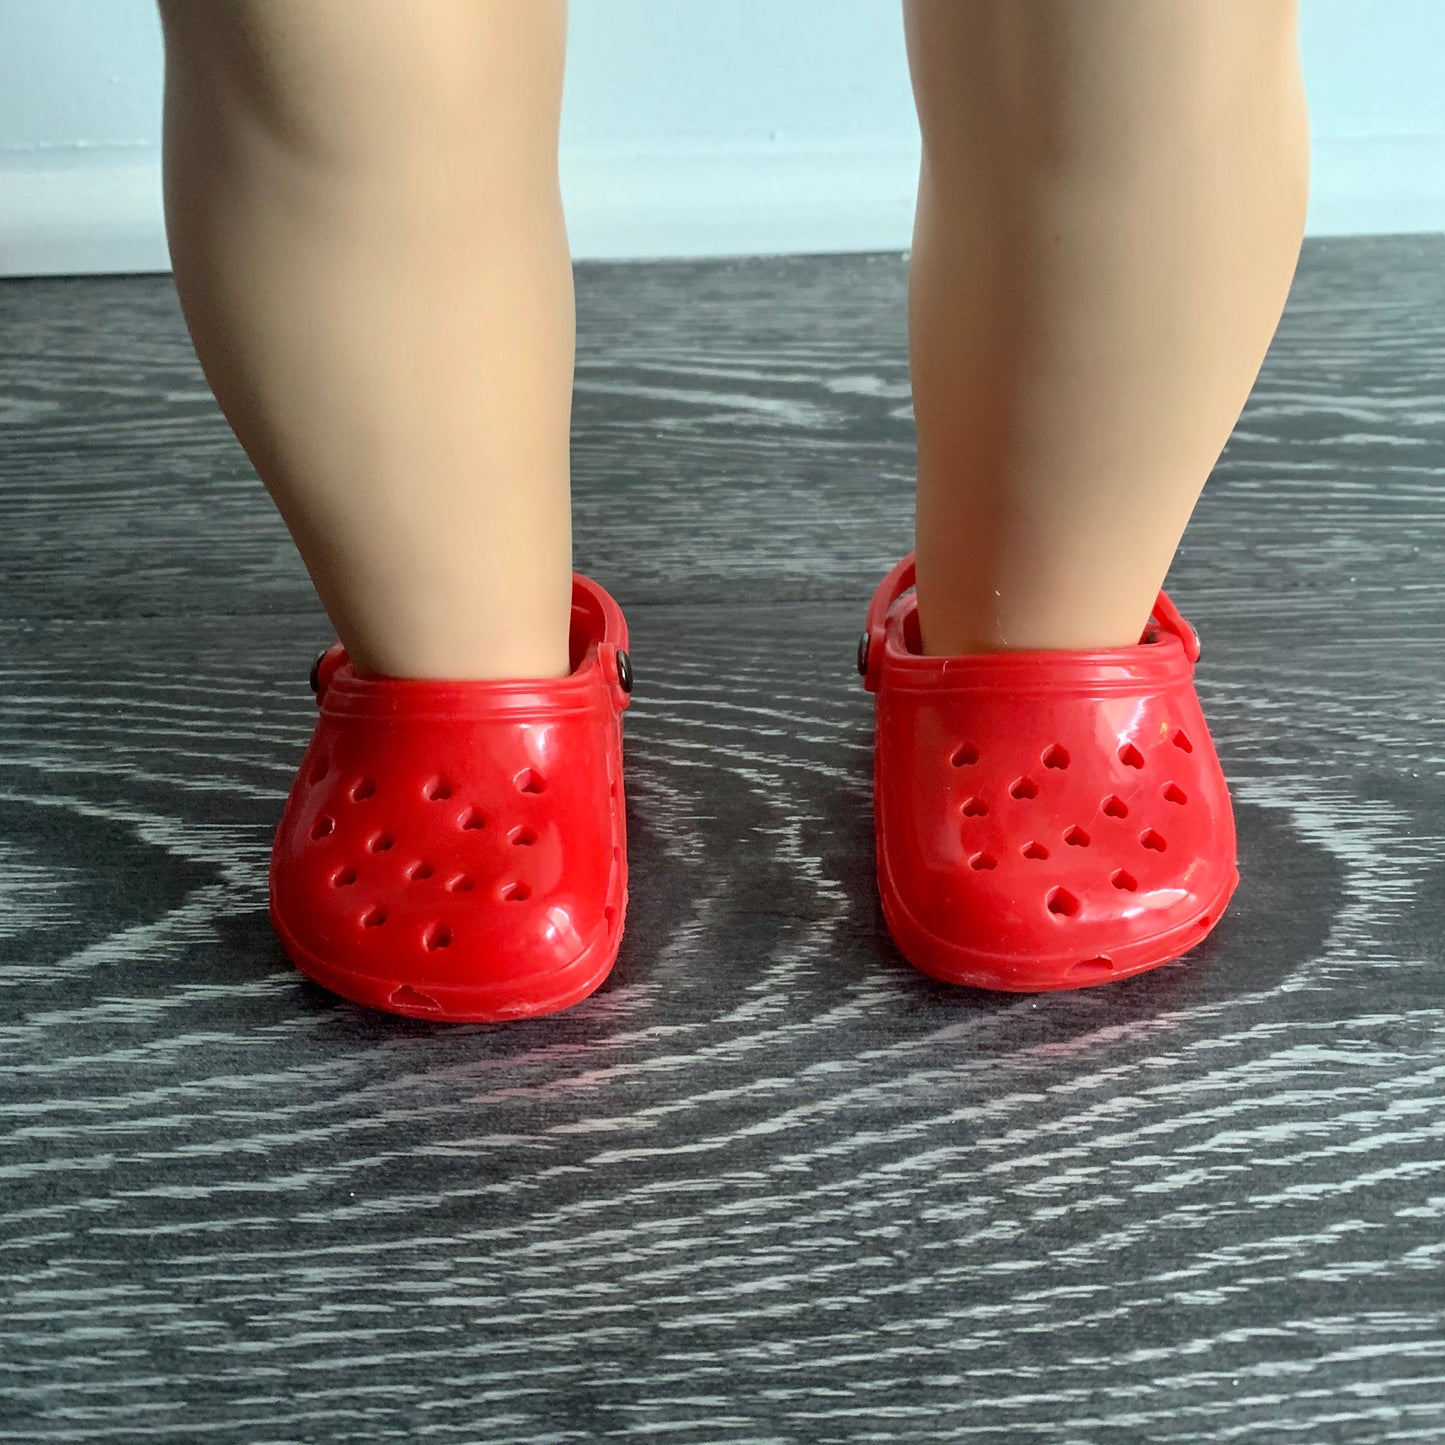 Doll-Sized Crocs (other colors available)